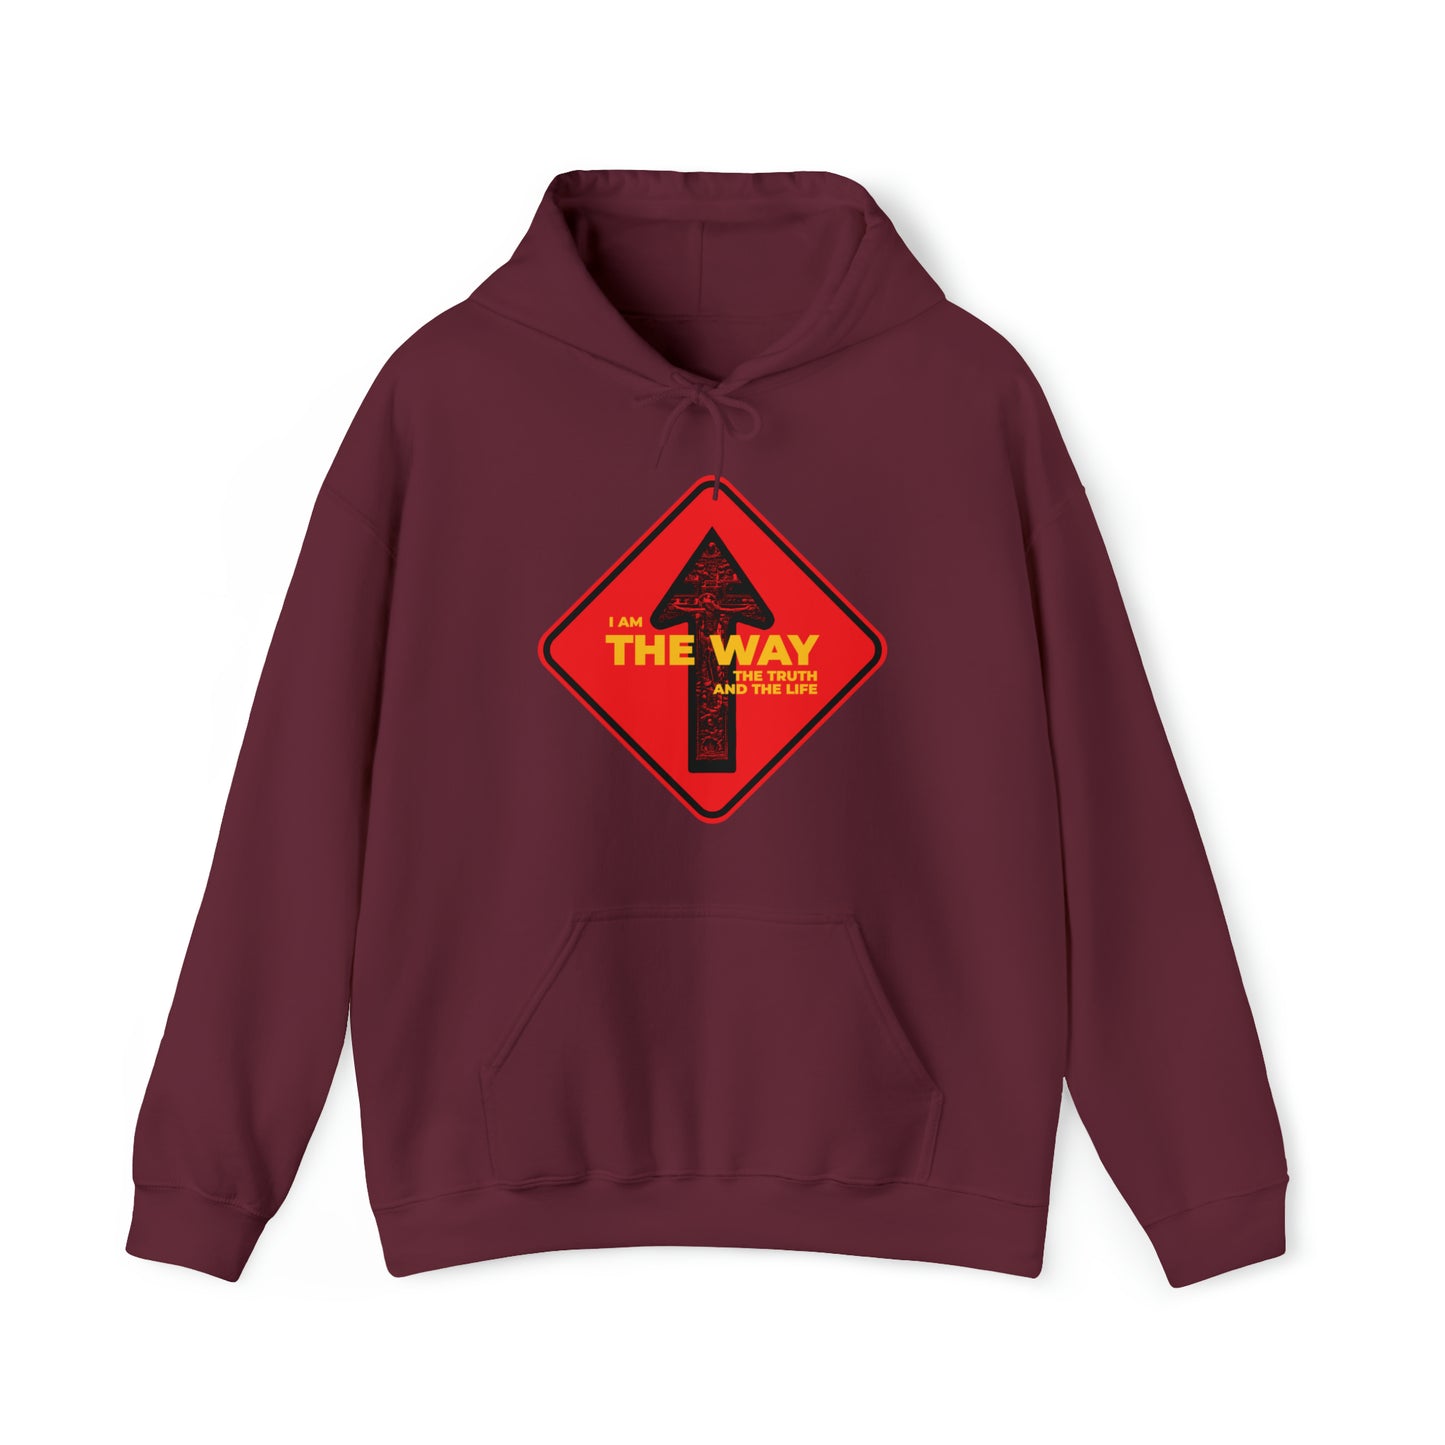 I Am the Way, the Truth and the Life No. 1 | Orthodox Christian Hoodie / Hooded Sweatshirt